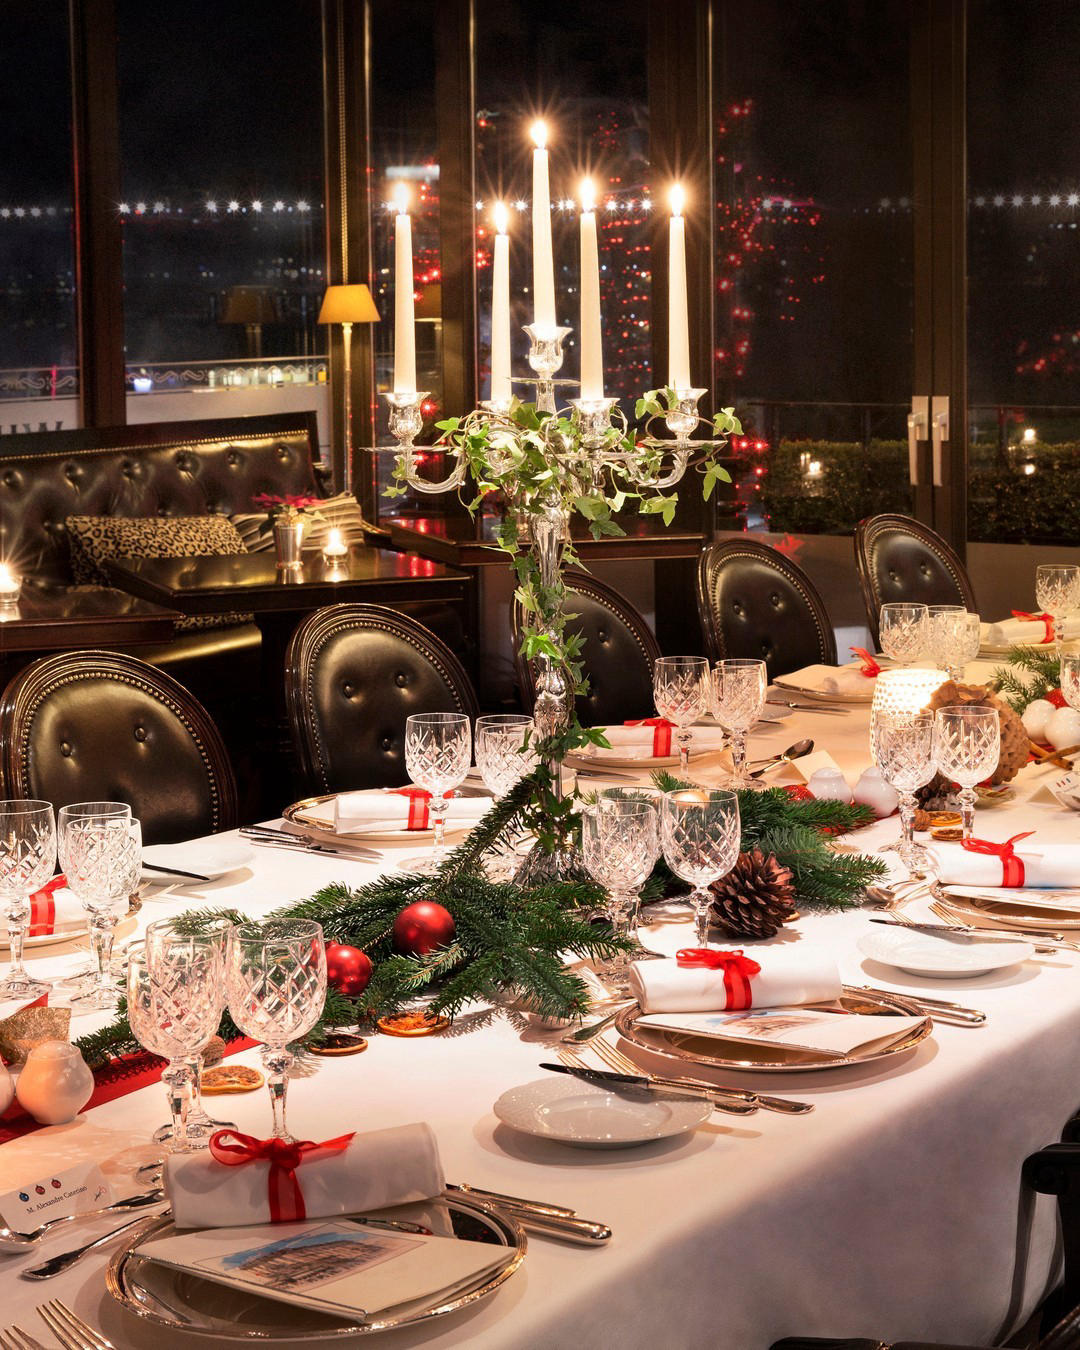 Hotel d'Angleterre - Are you joining us for Christmas Eve Lunch here at #HotelDAngleterre